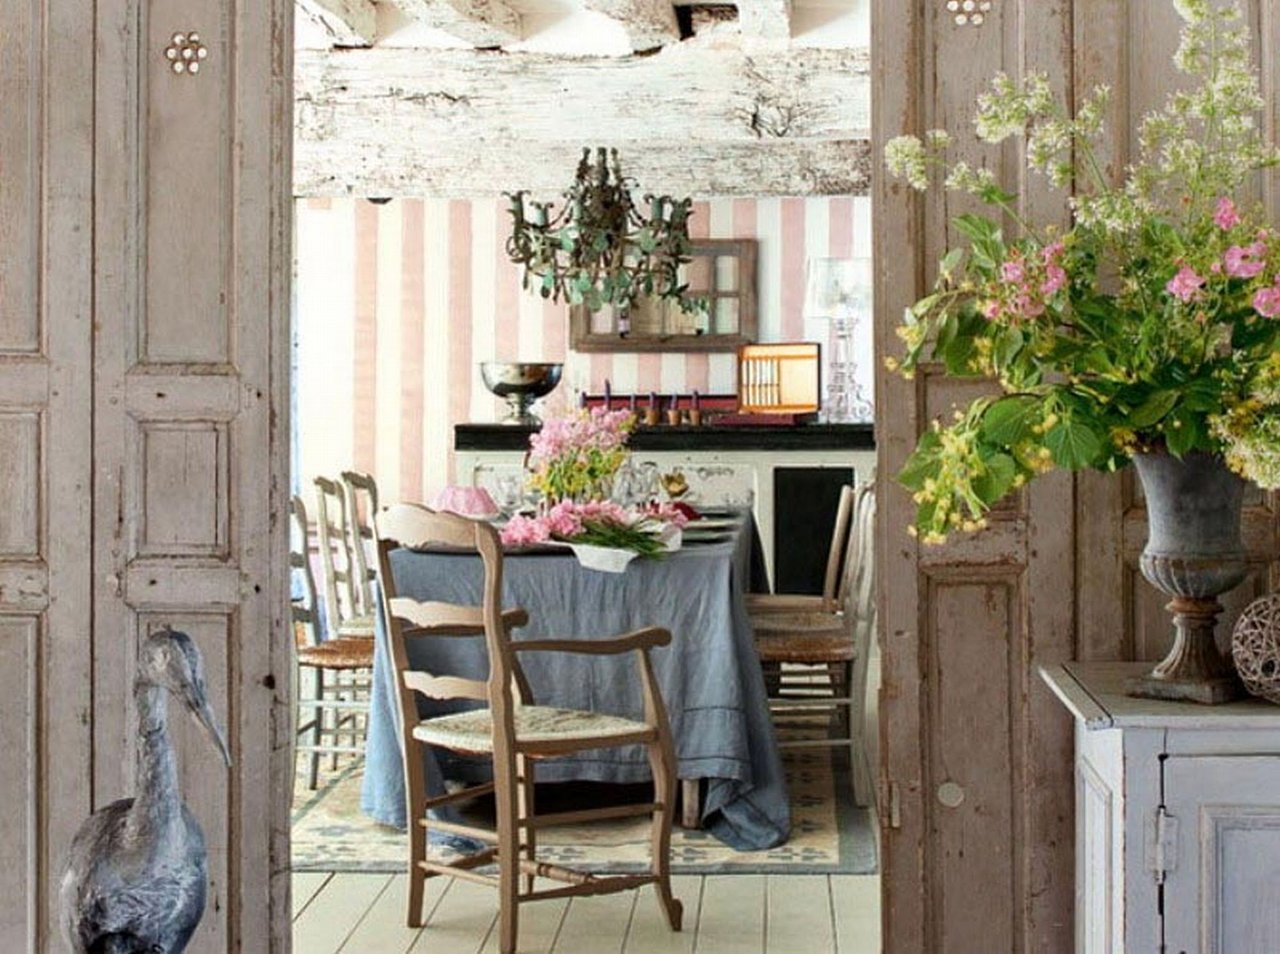 Feel Inspired by This Vintage Country Home Ideas! 1